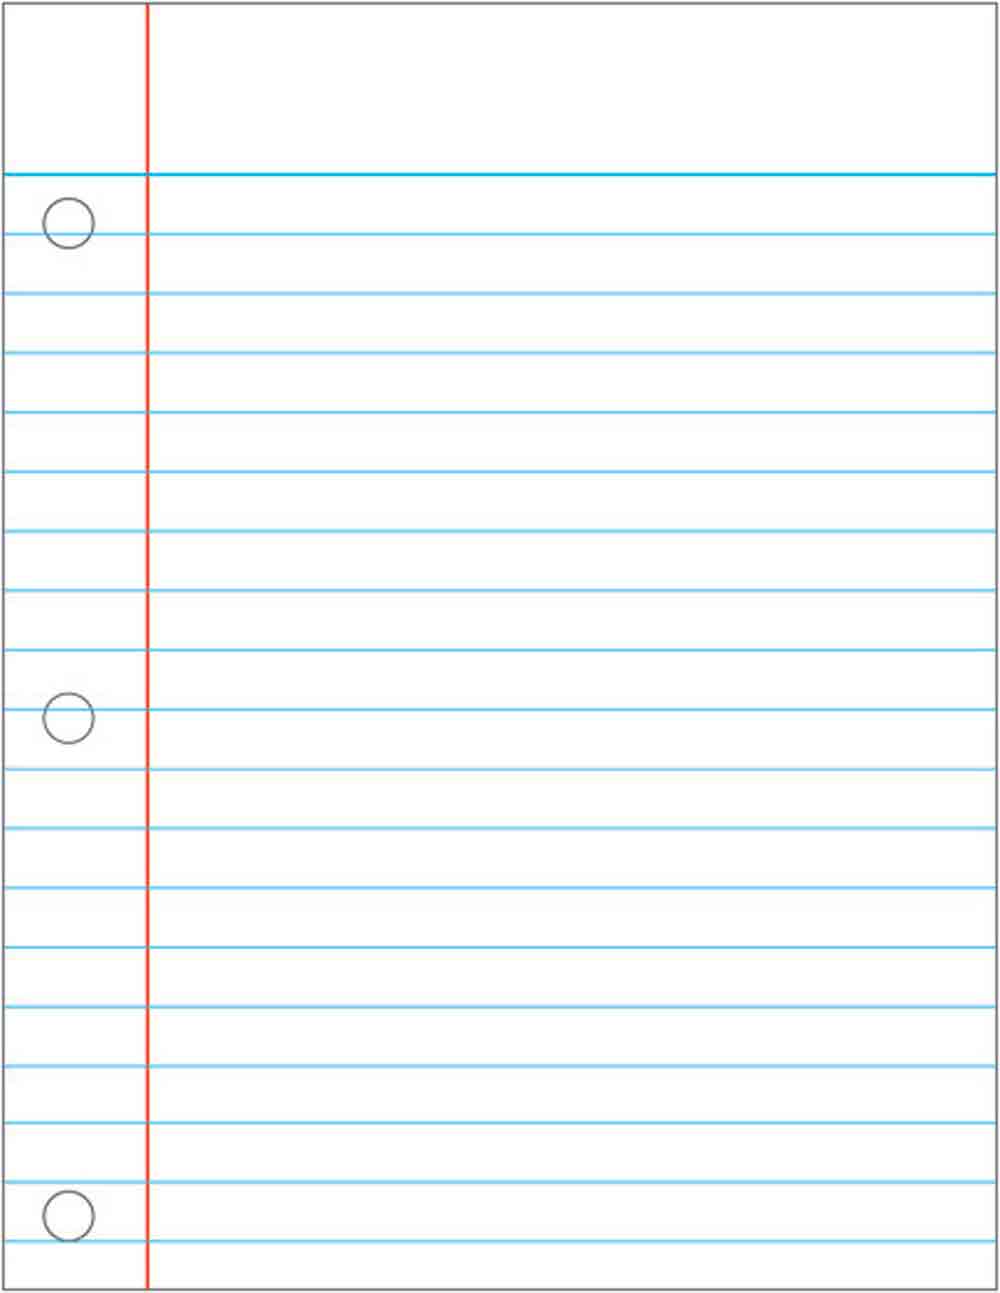 7 Best Images of Notebook Paper Printable PDF - Wide Ruled Notebook